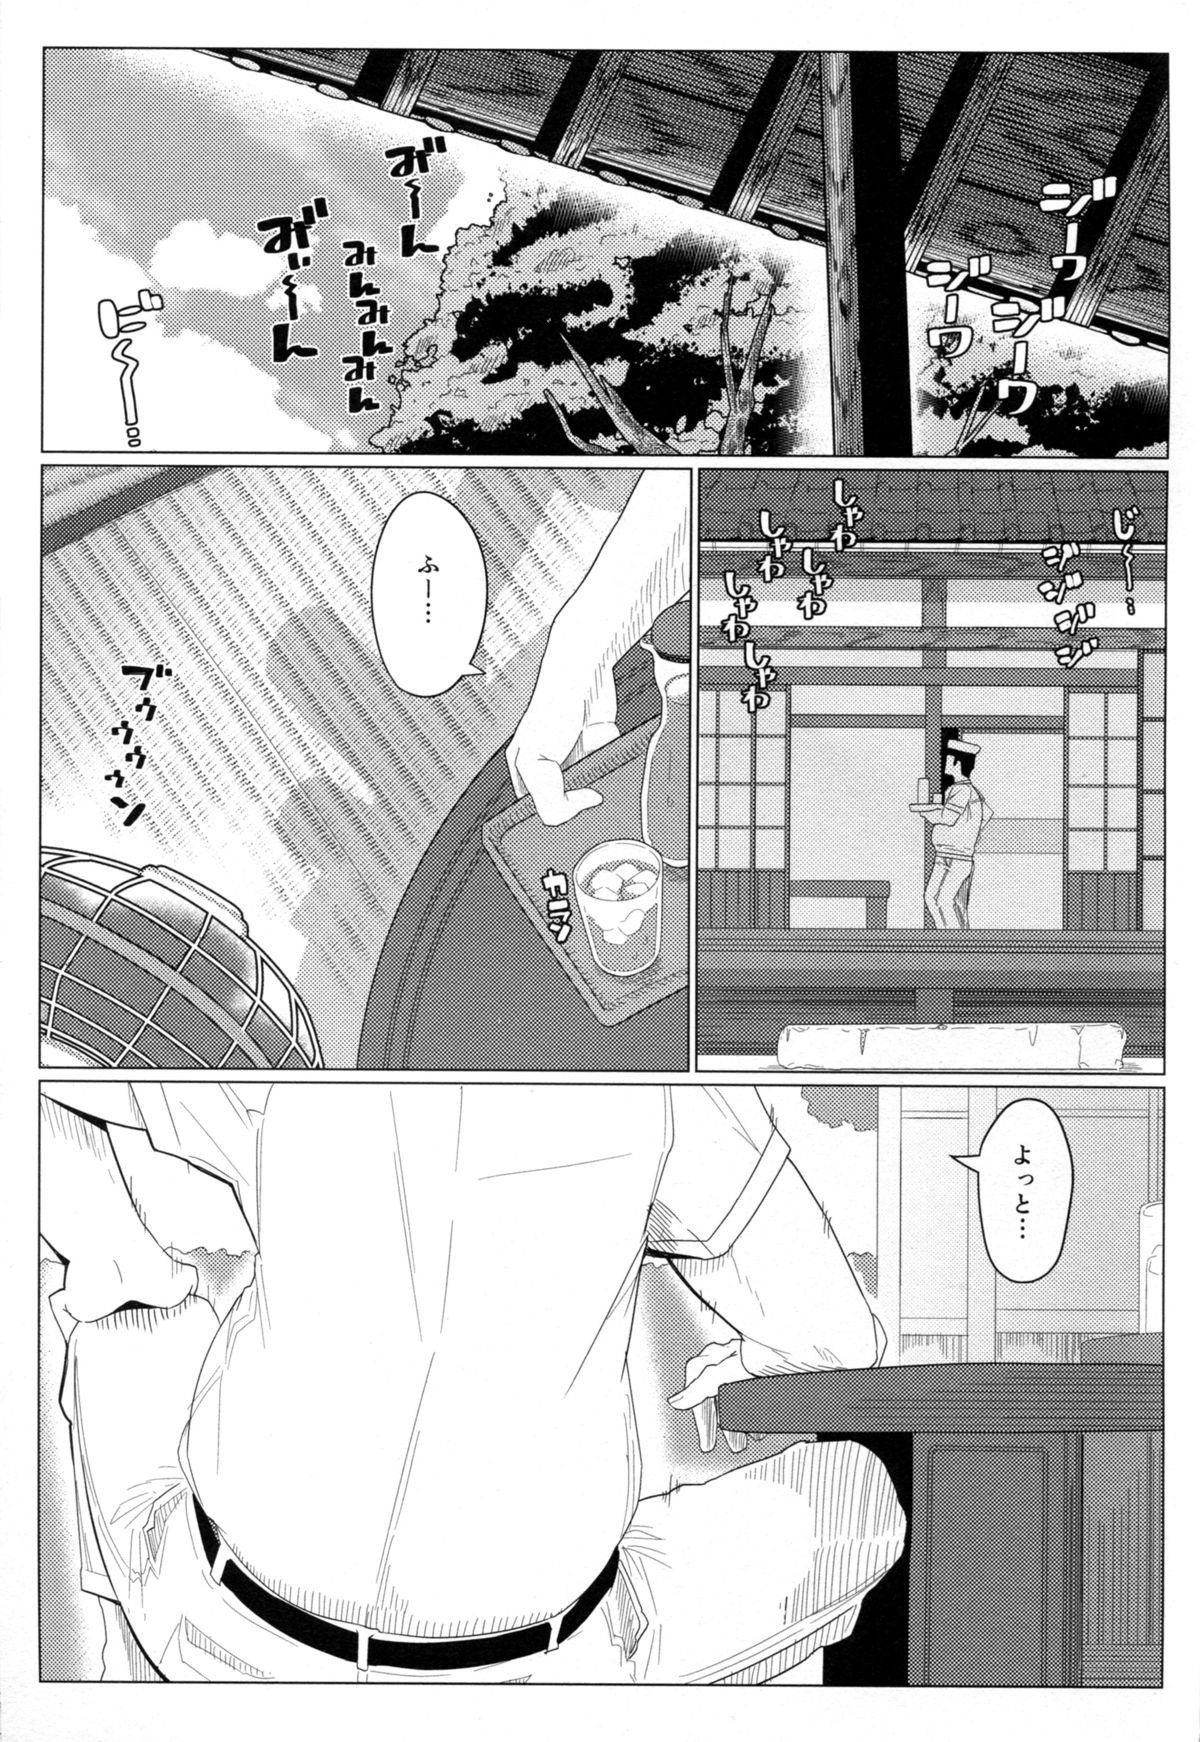 Spanish GIRLFriend’s 9 - Kantai collection Piercing - Page 3